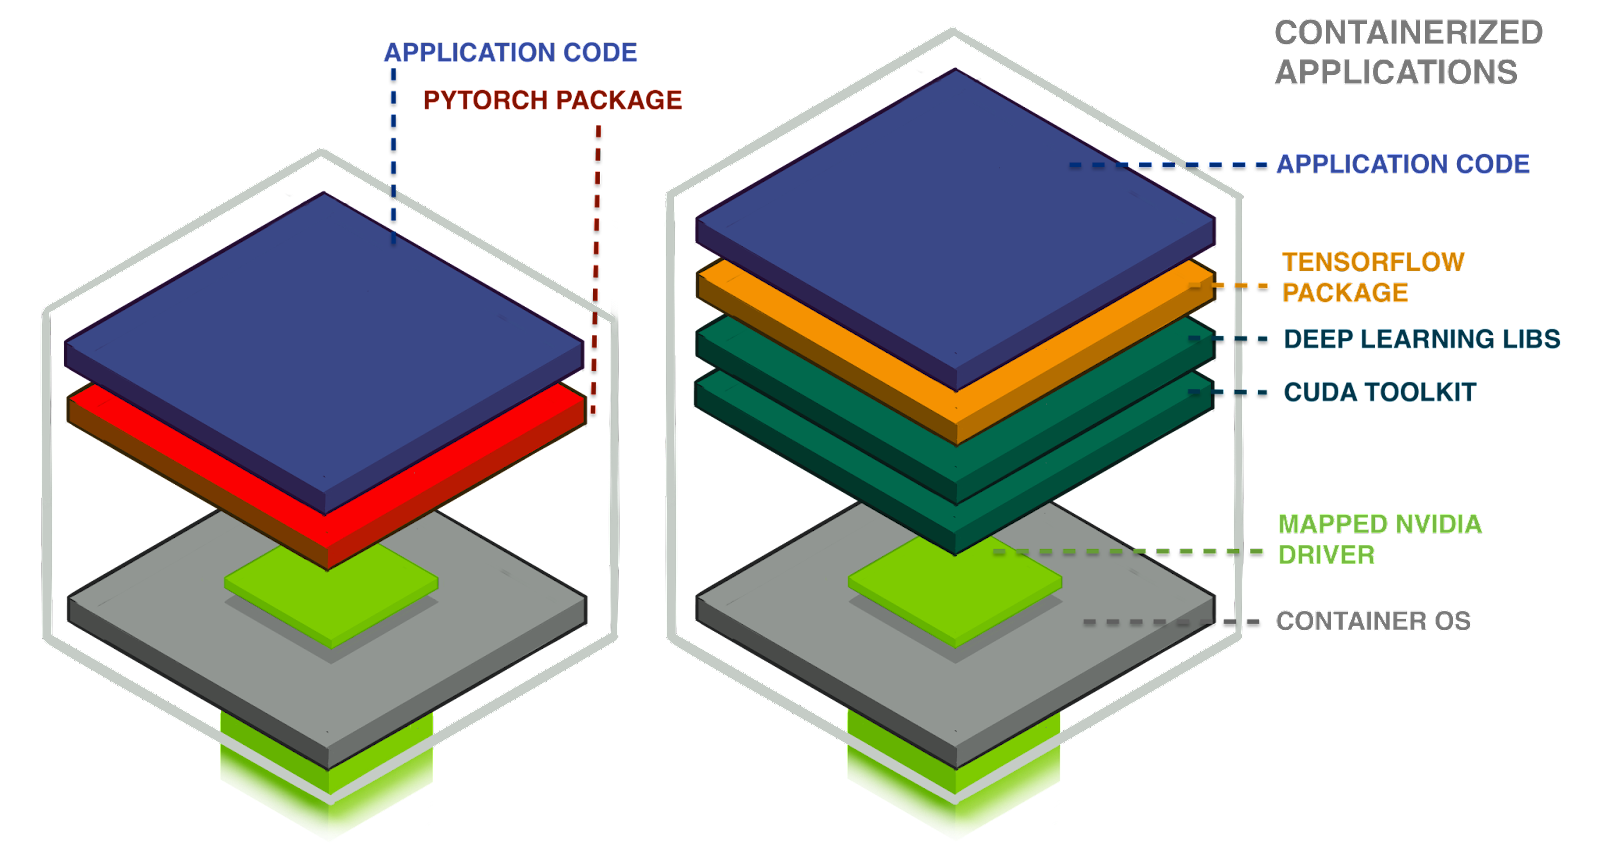 Illustration of the Containerized Application stack